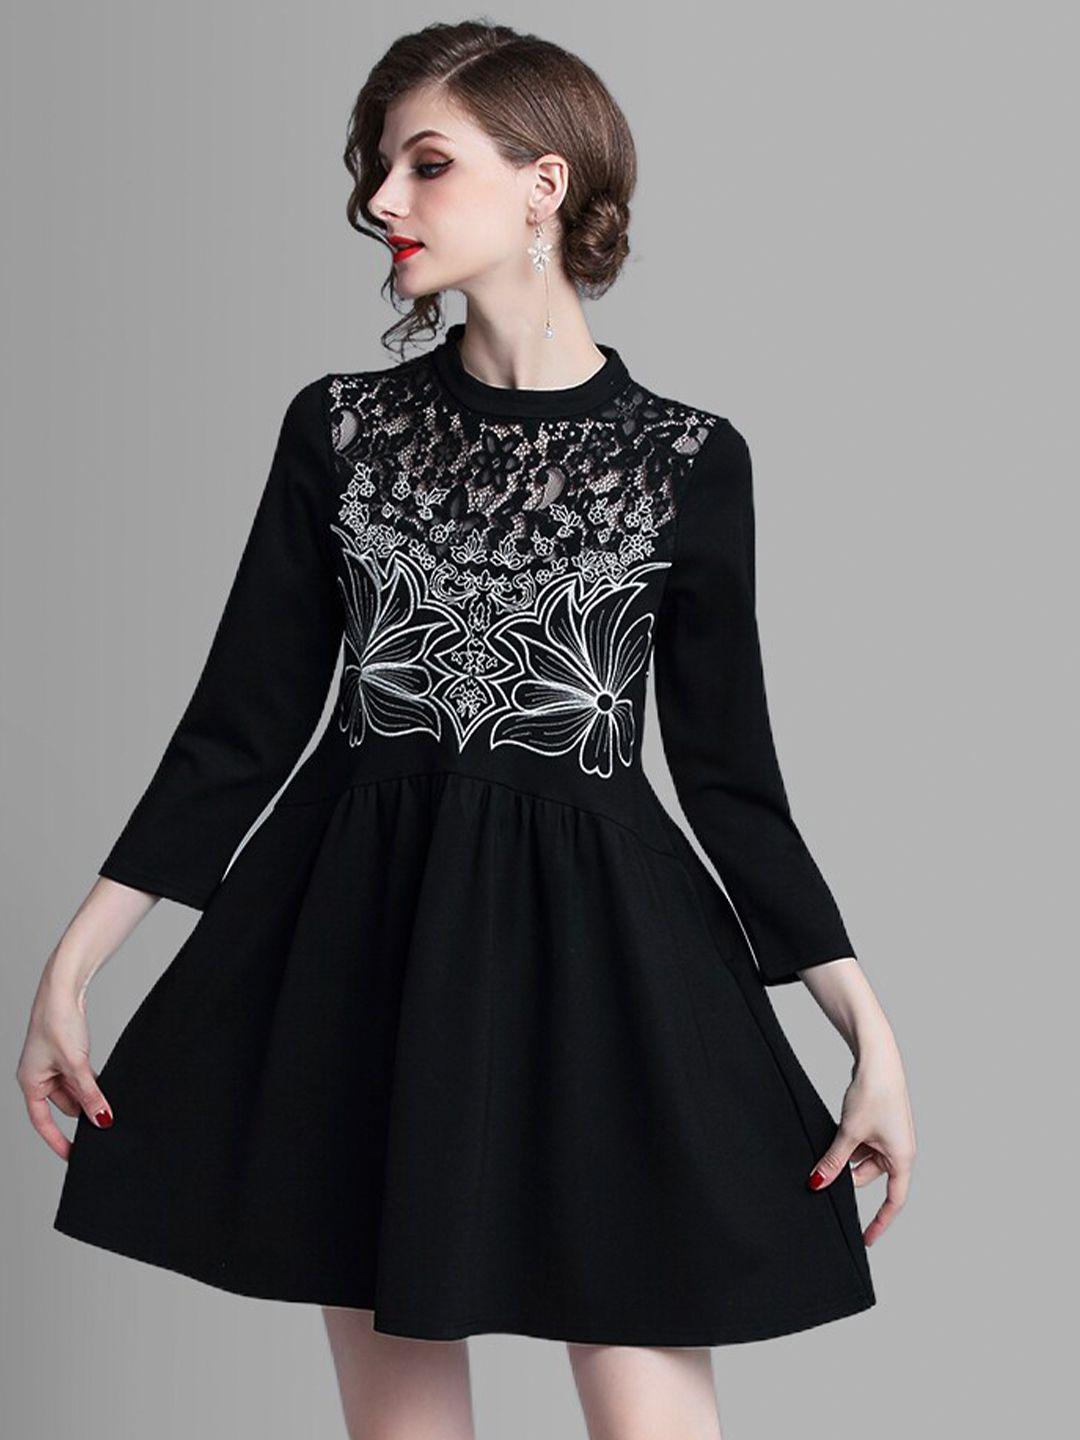 jc collection women black fit & flare dress